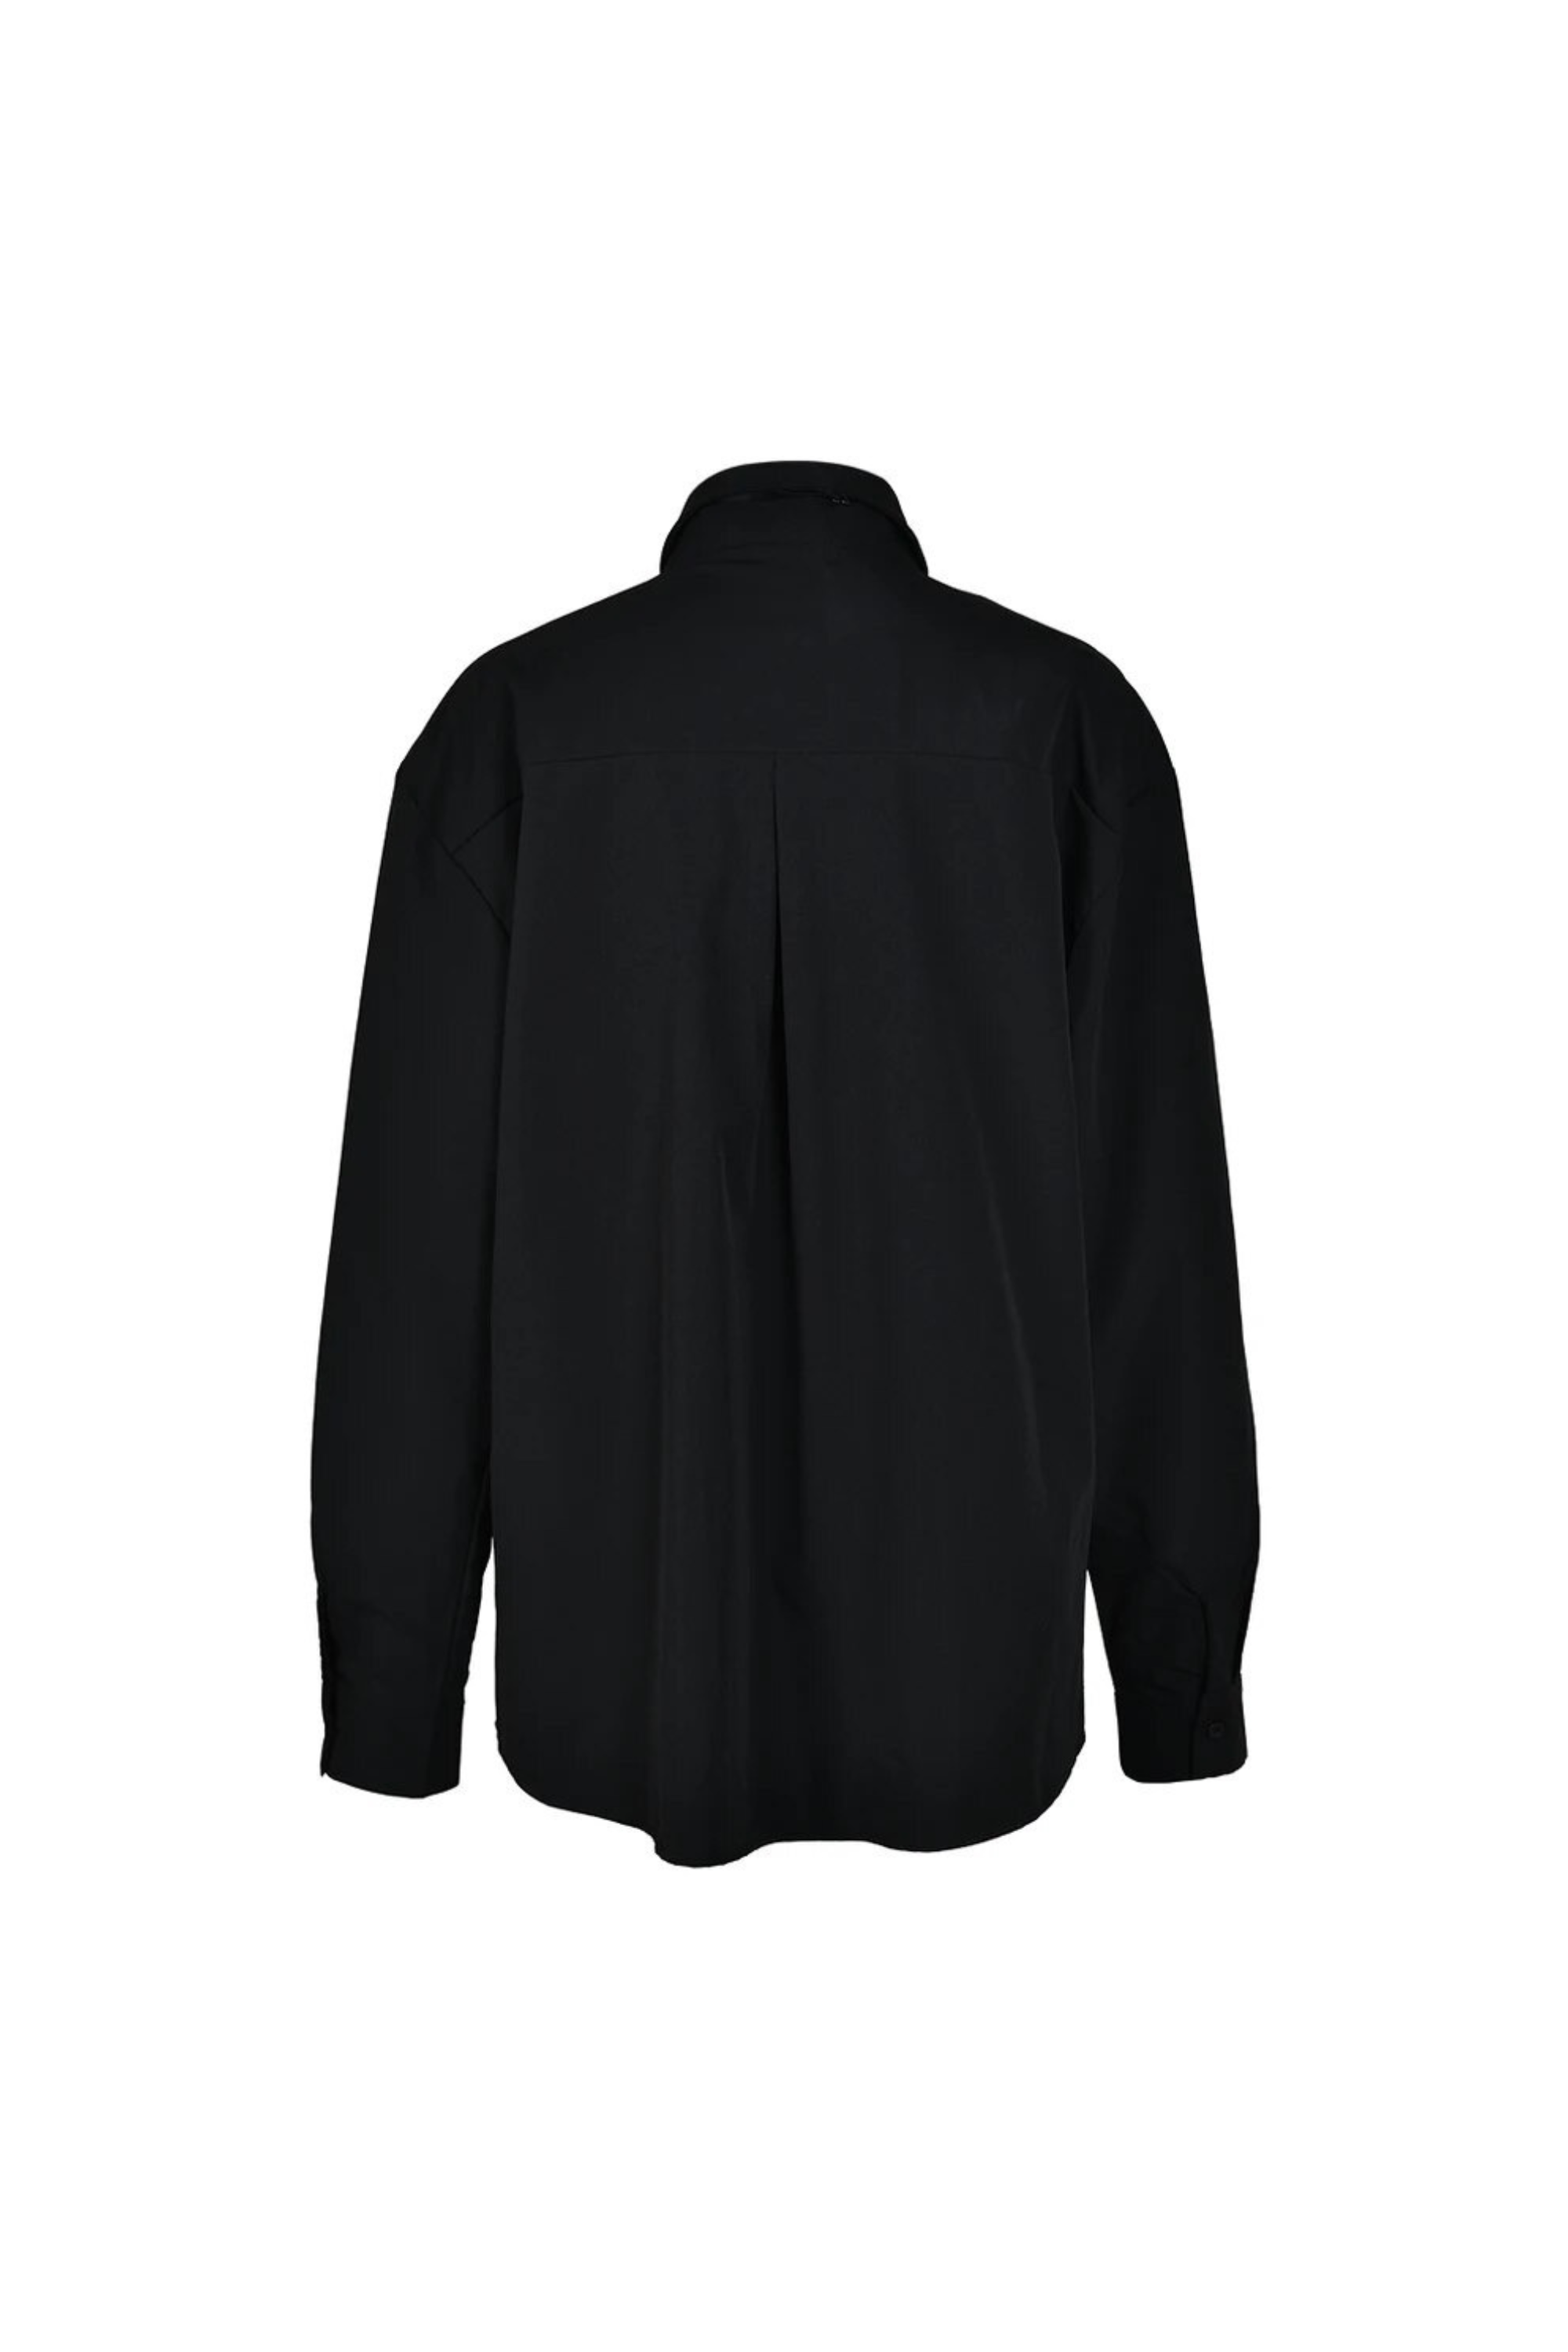 GOLDxTEAL stylish black button-down shirt with silver metal embellishments.